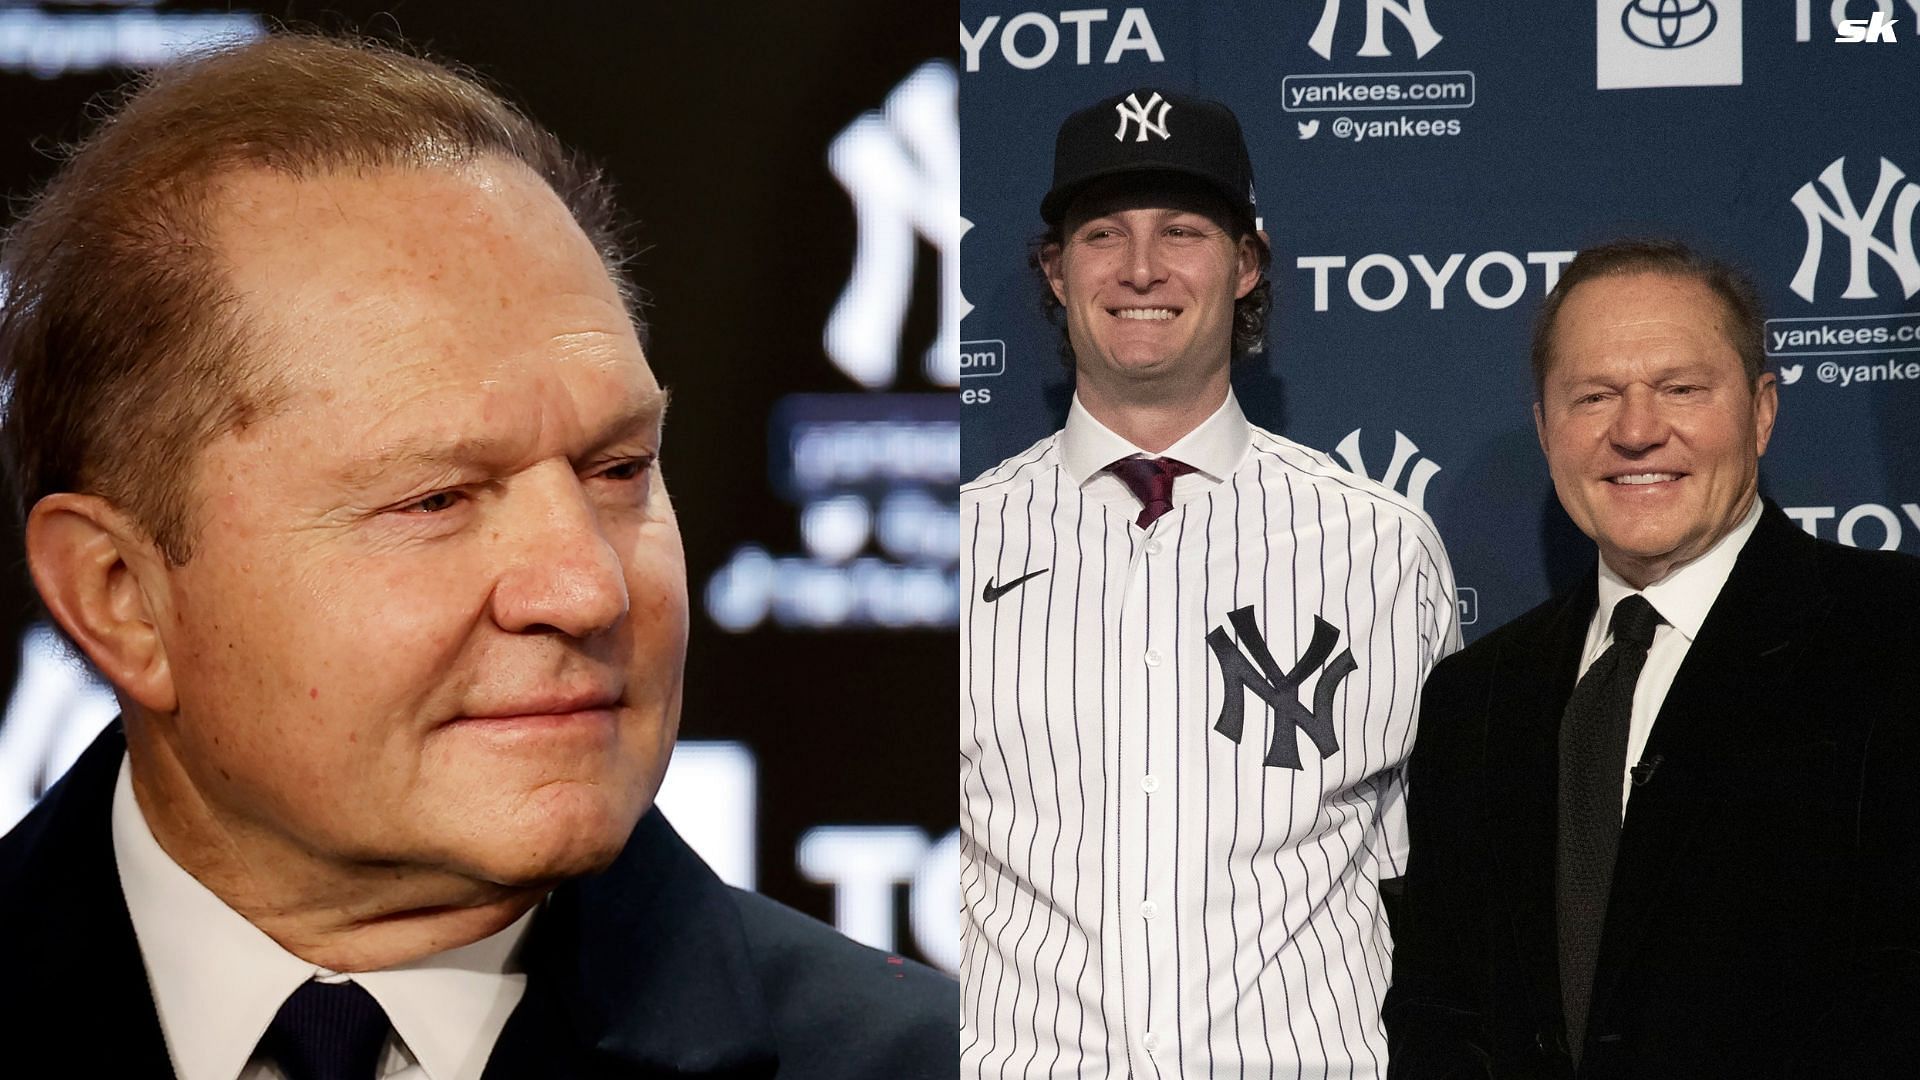 Scott Boras has monumental ties with the Steinbrenner family and the Yankees